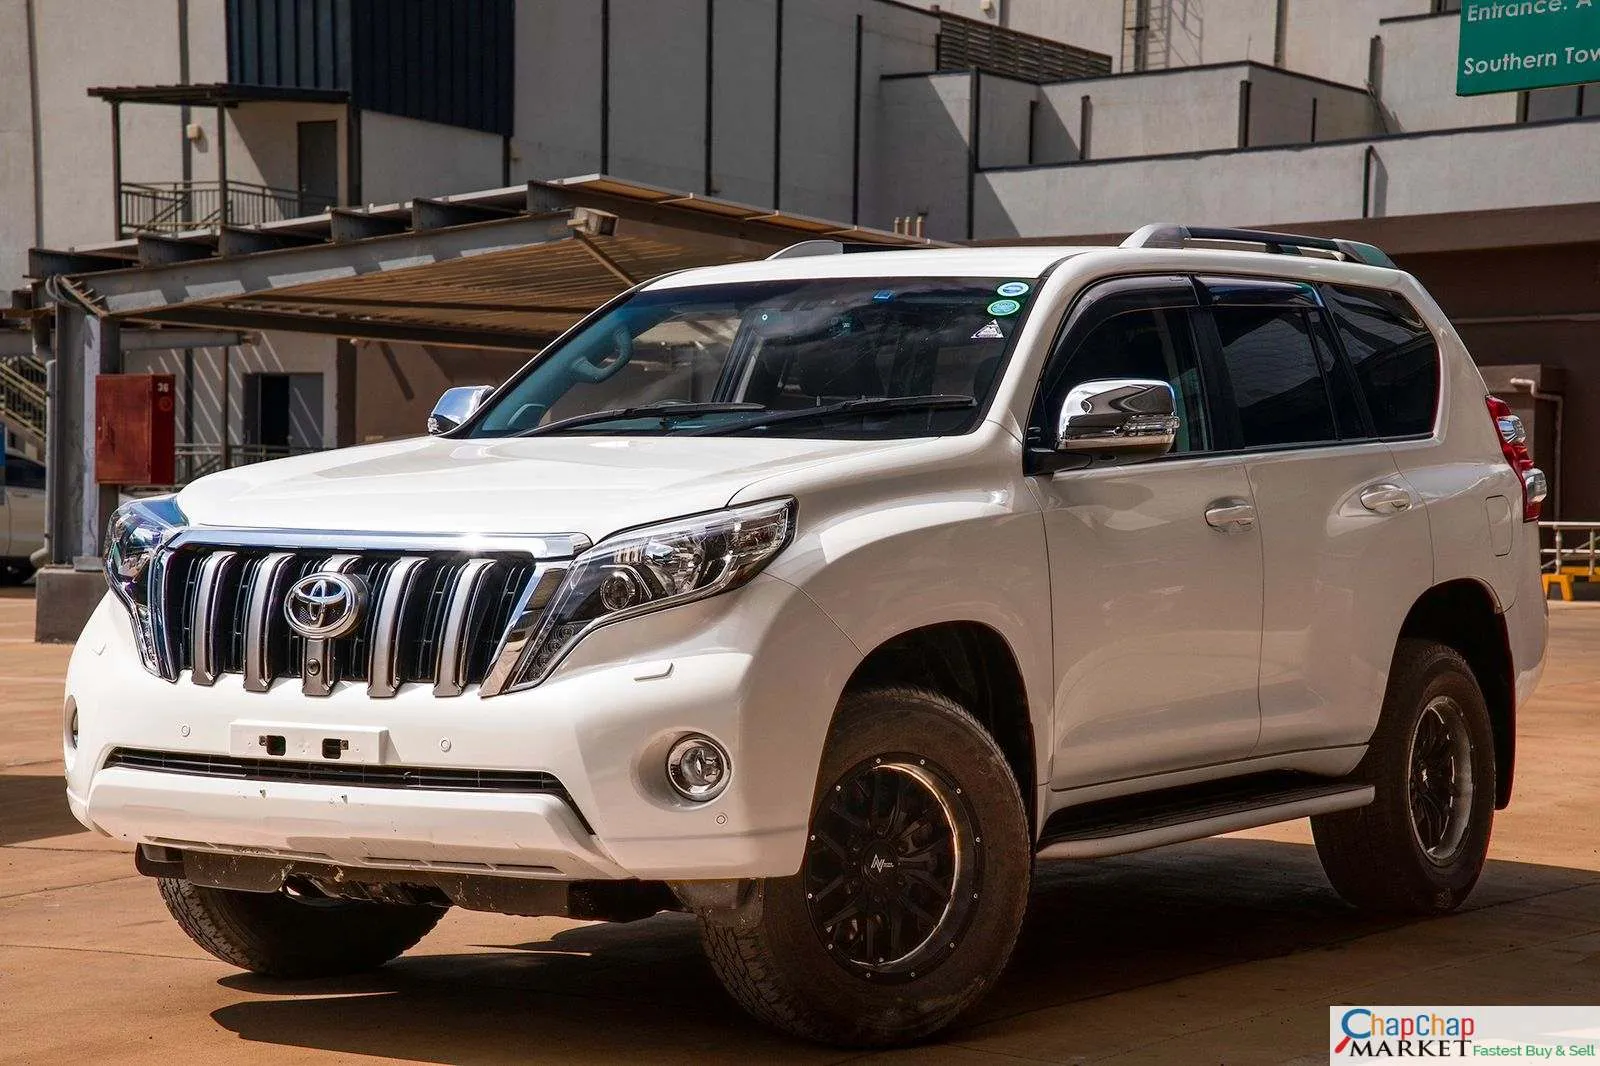 Toyota PRADO for sale in Kenya TXL Sunroof Quick SALE TRADE IN OK EXCLUSIVE! Hire purchase installments